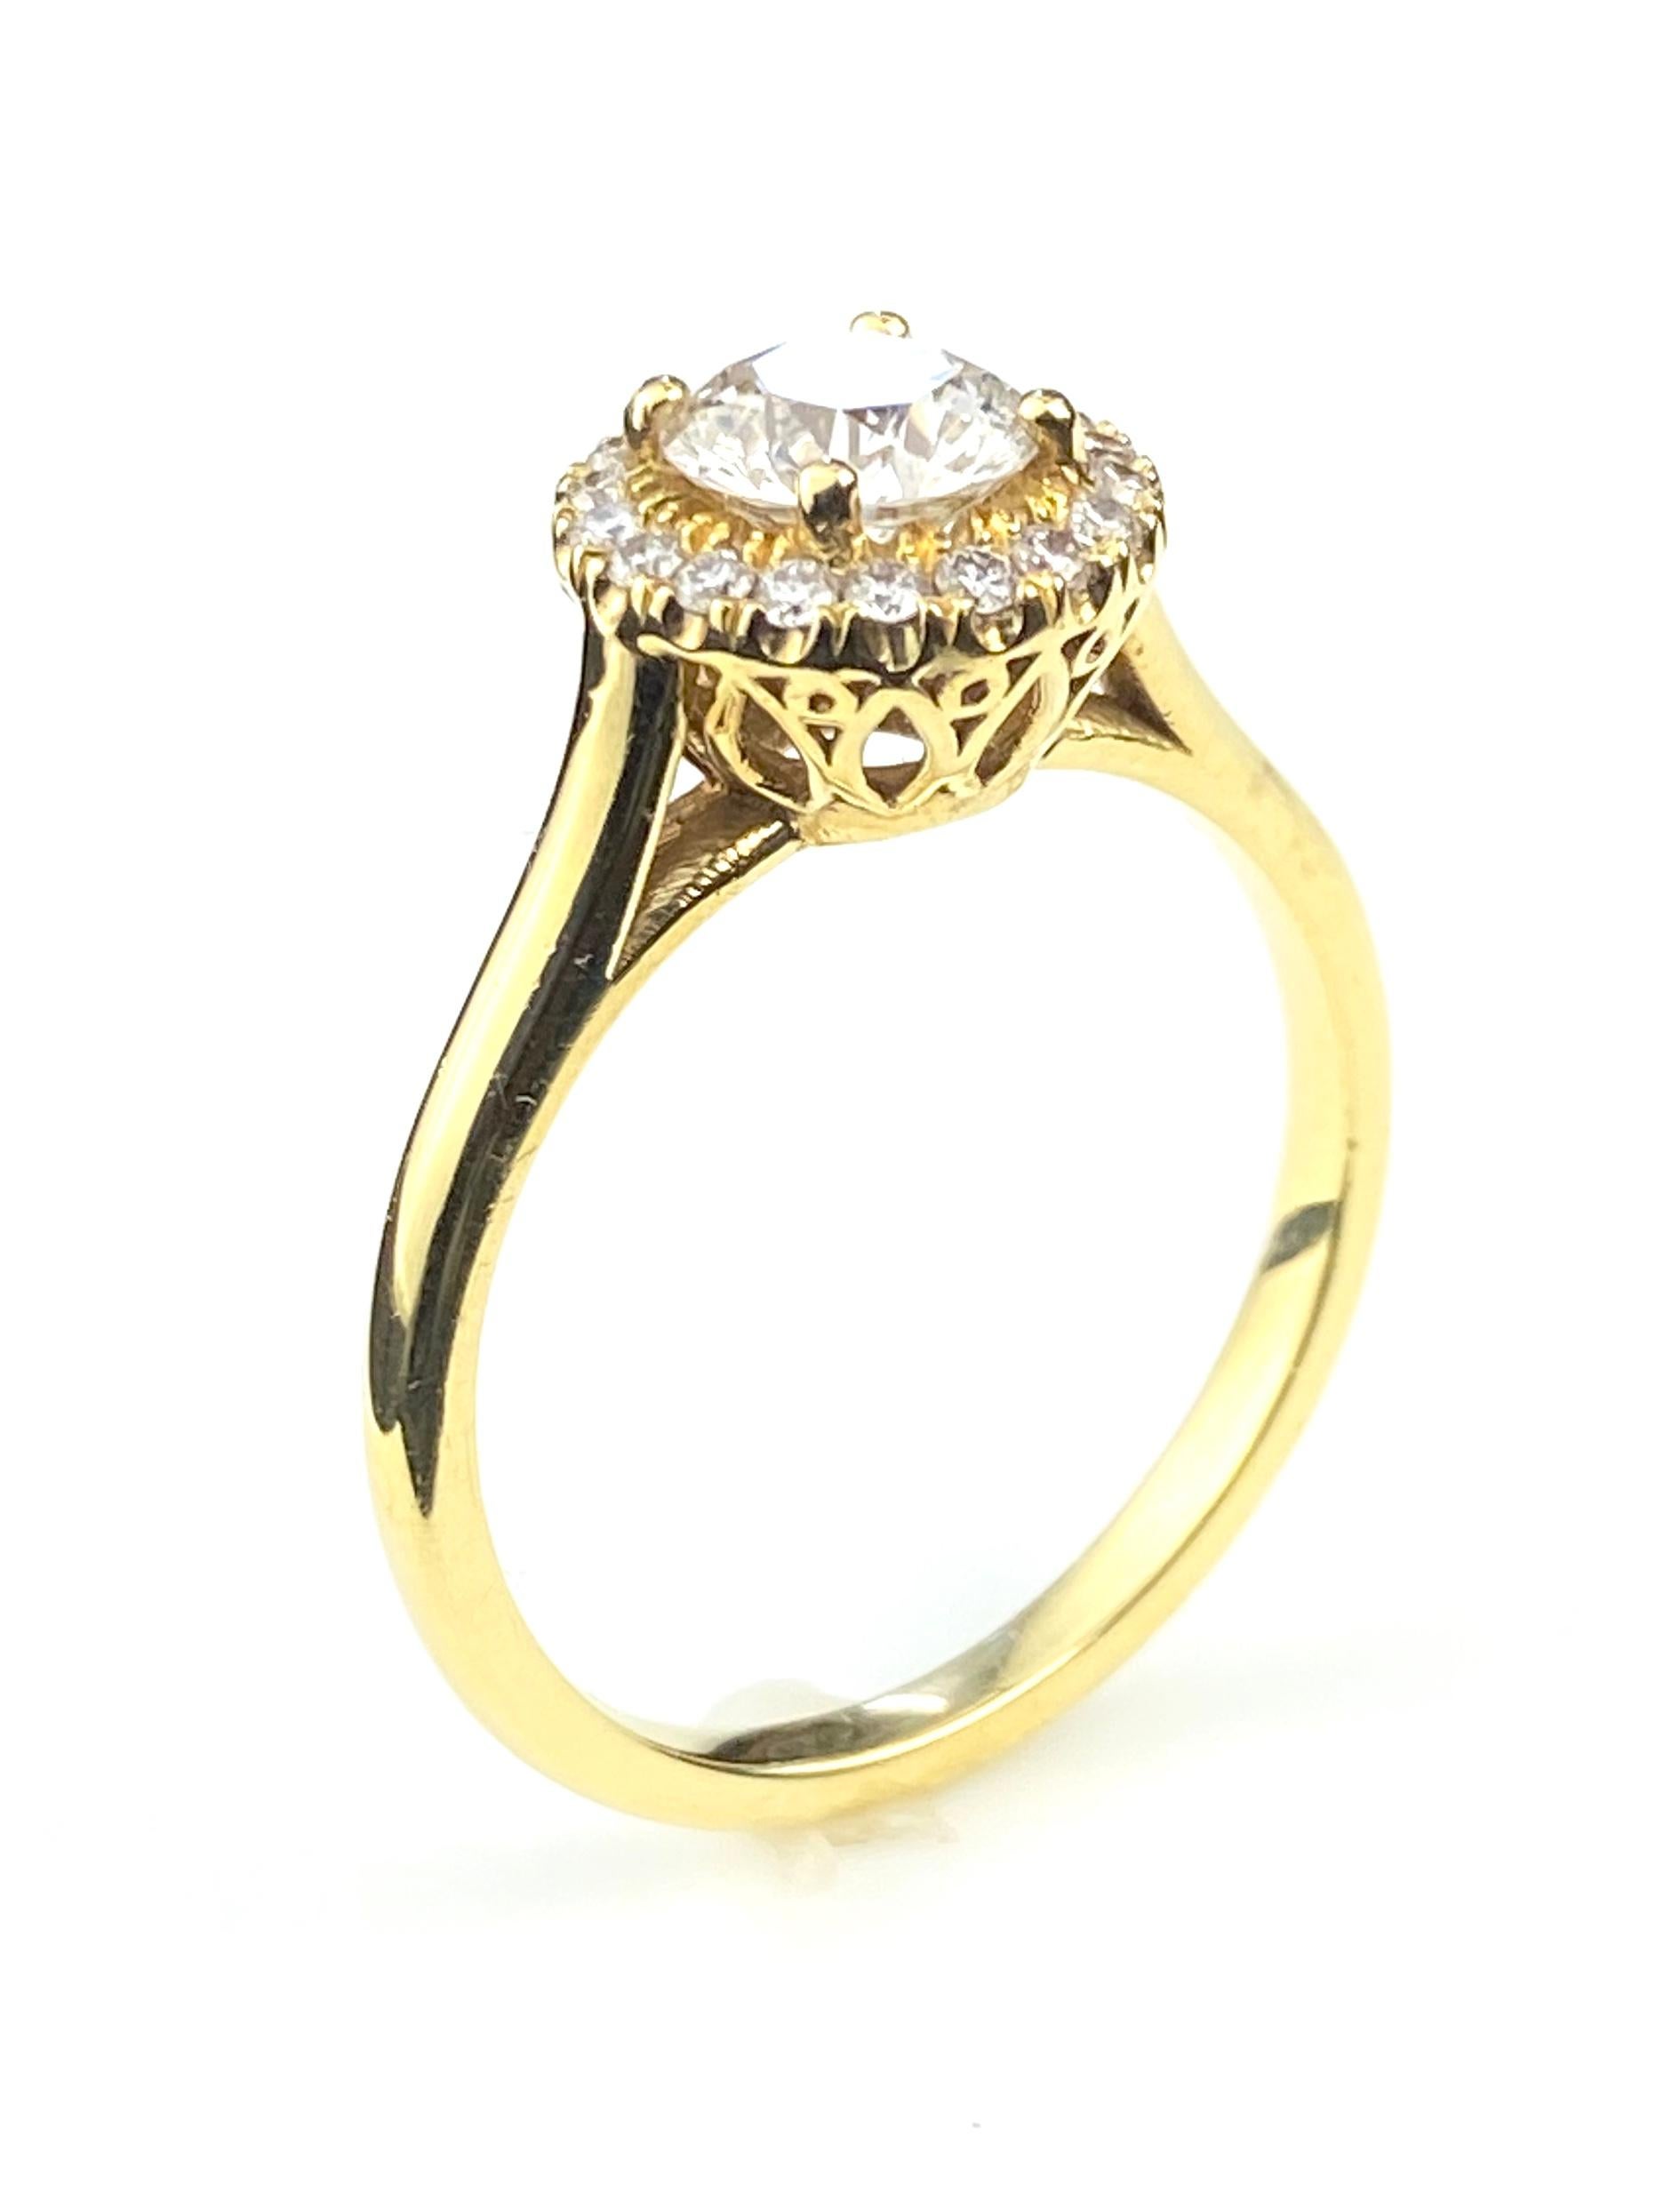 Contemporary Round Cut Diamond Yellow Gold Engagement Ring with Halo and Basket Setting For Sale